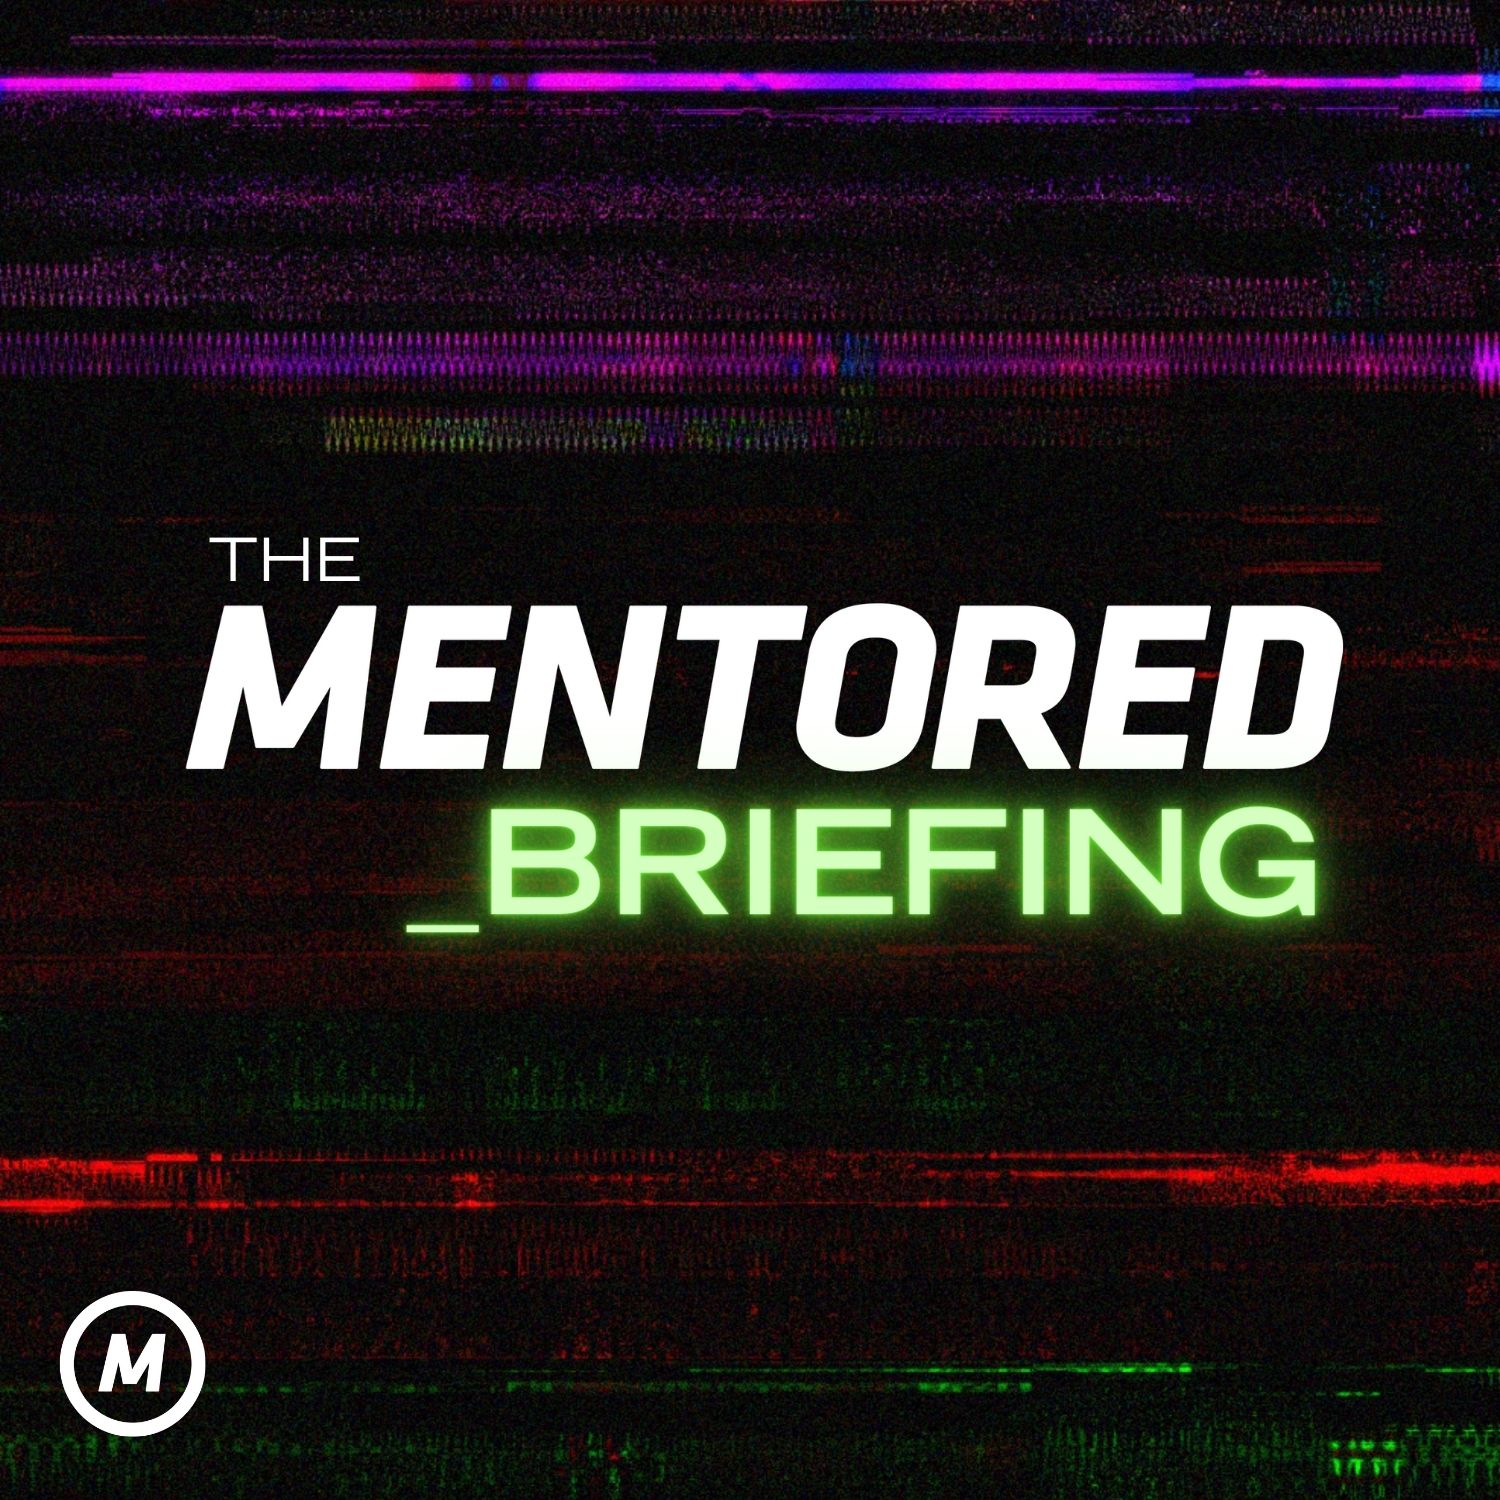 The Mentored Briefing